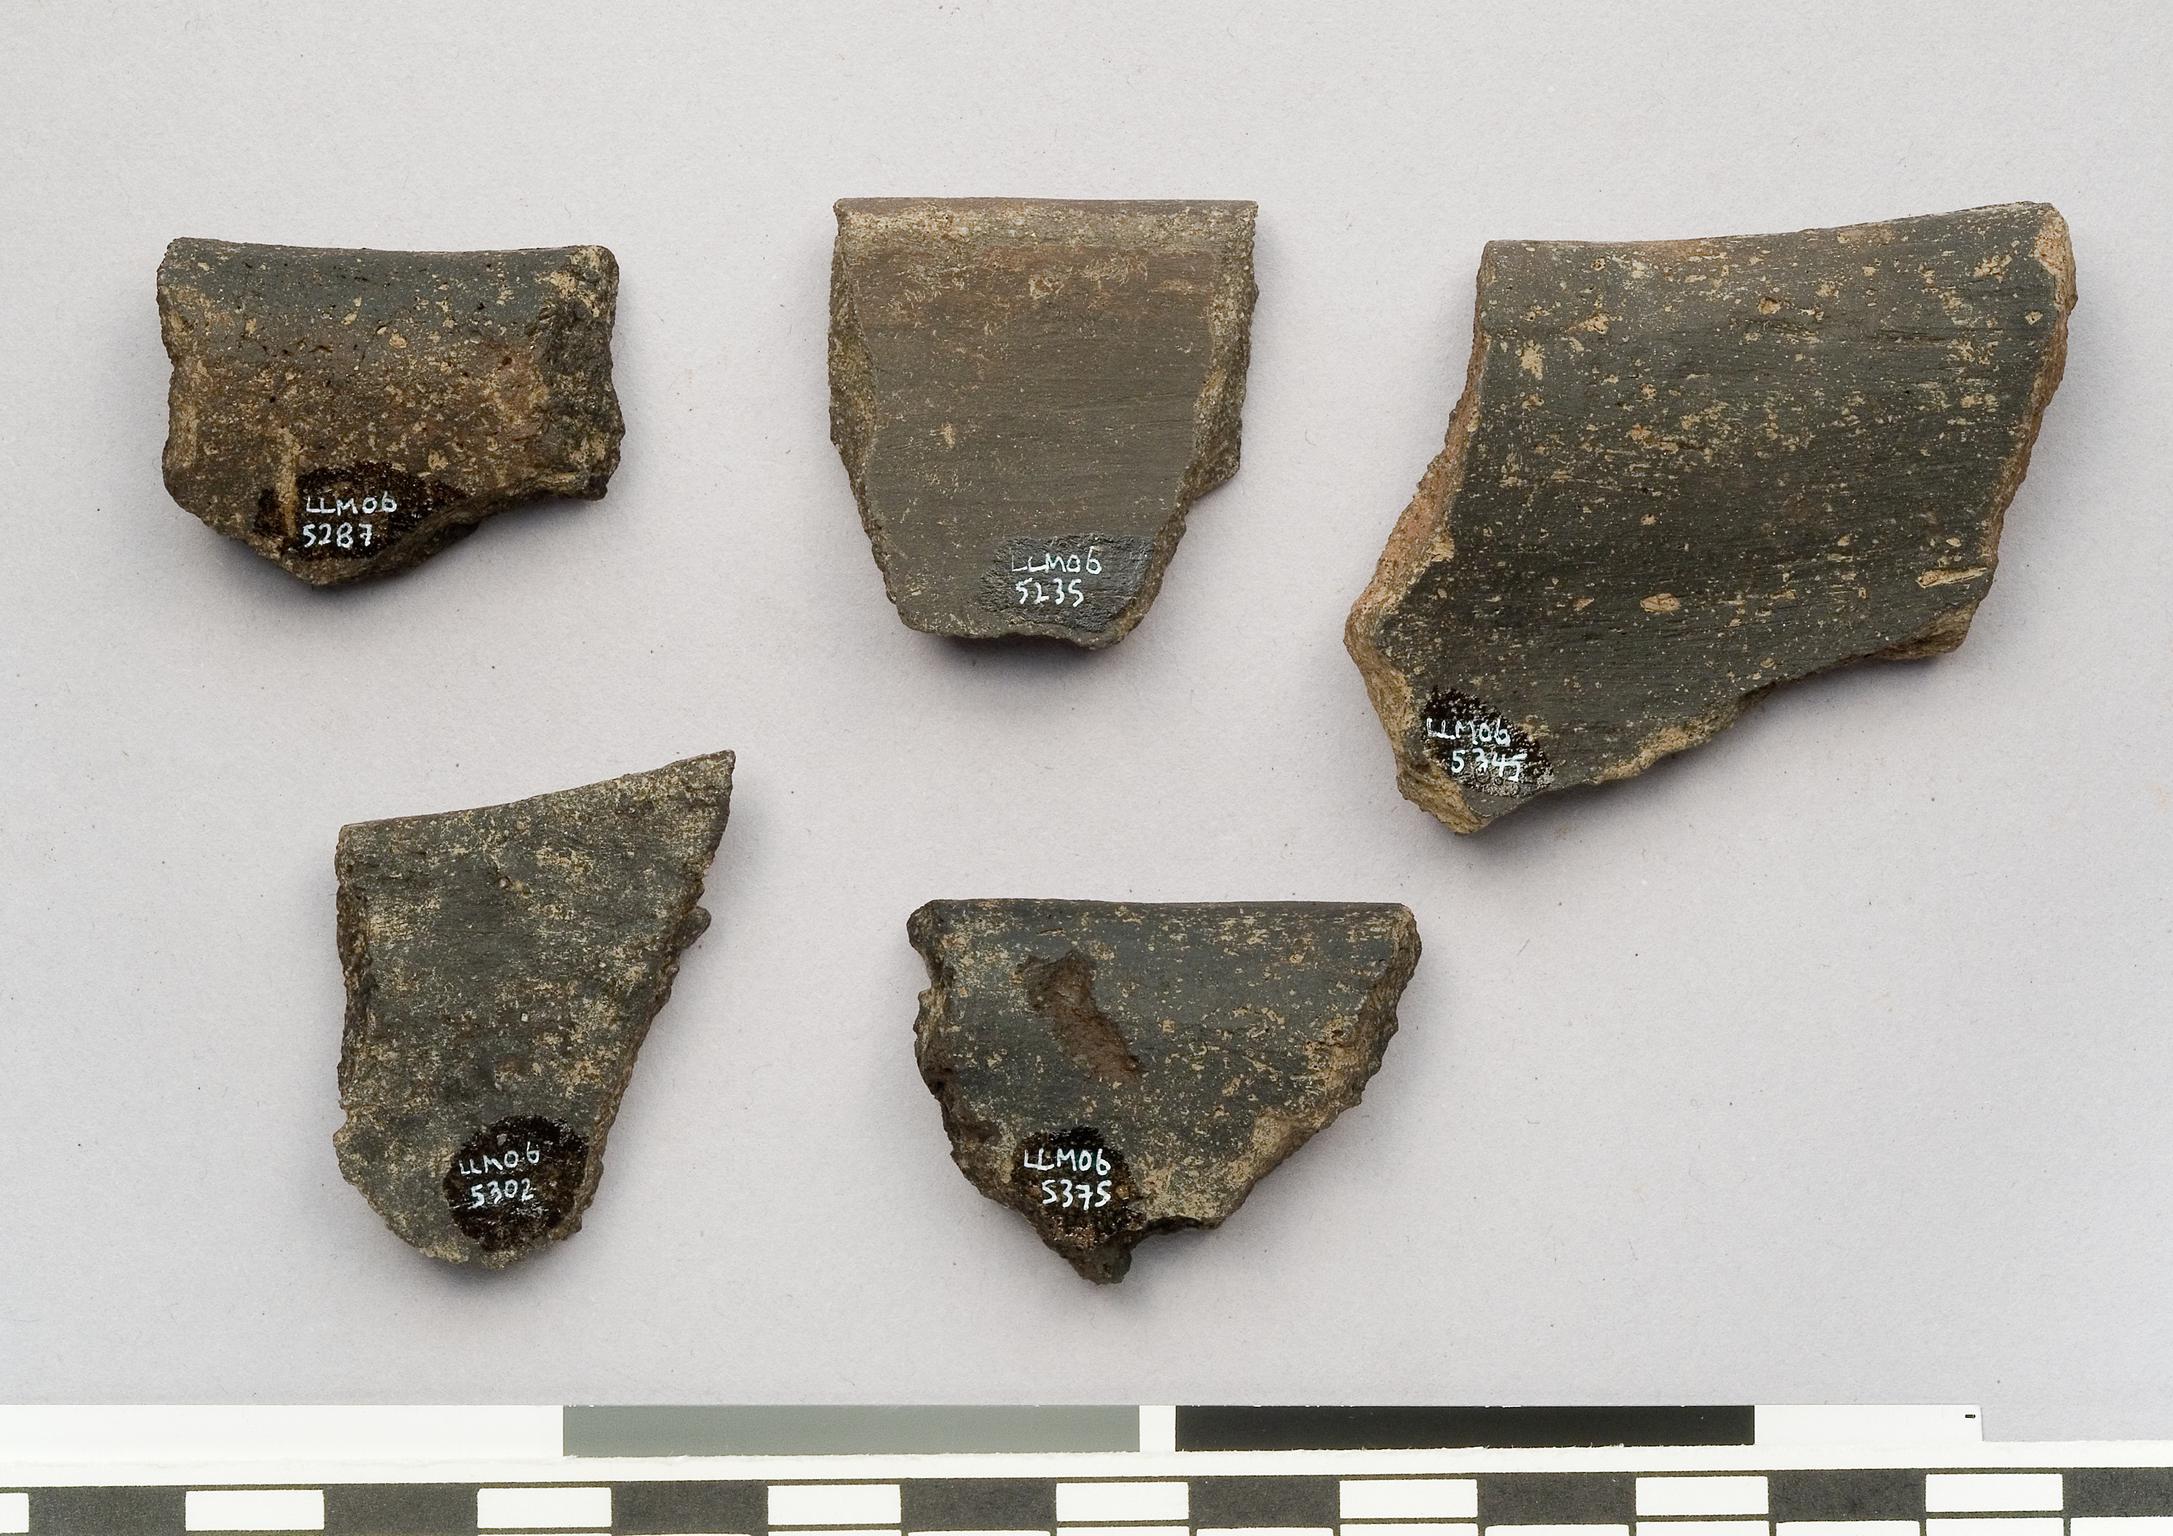 Finds from Llanmaes excavations